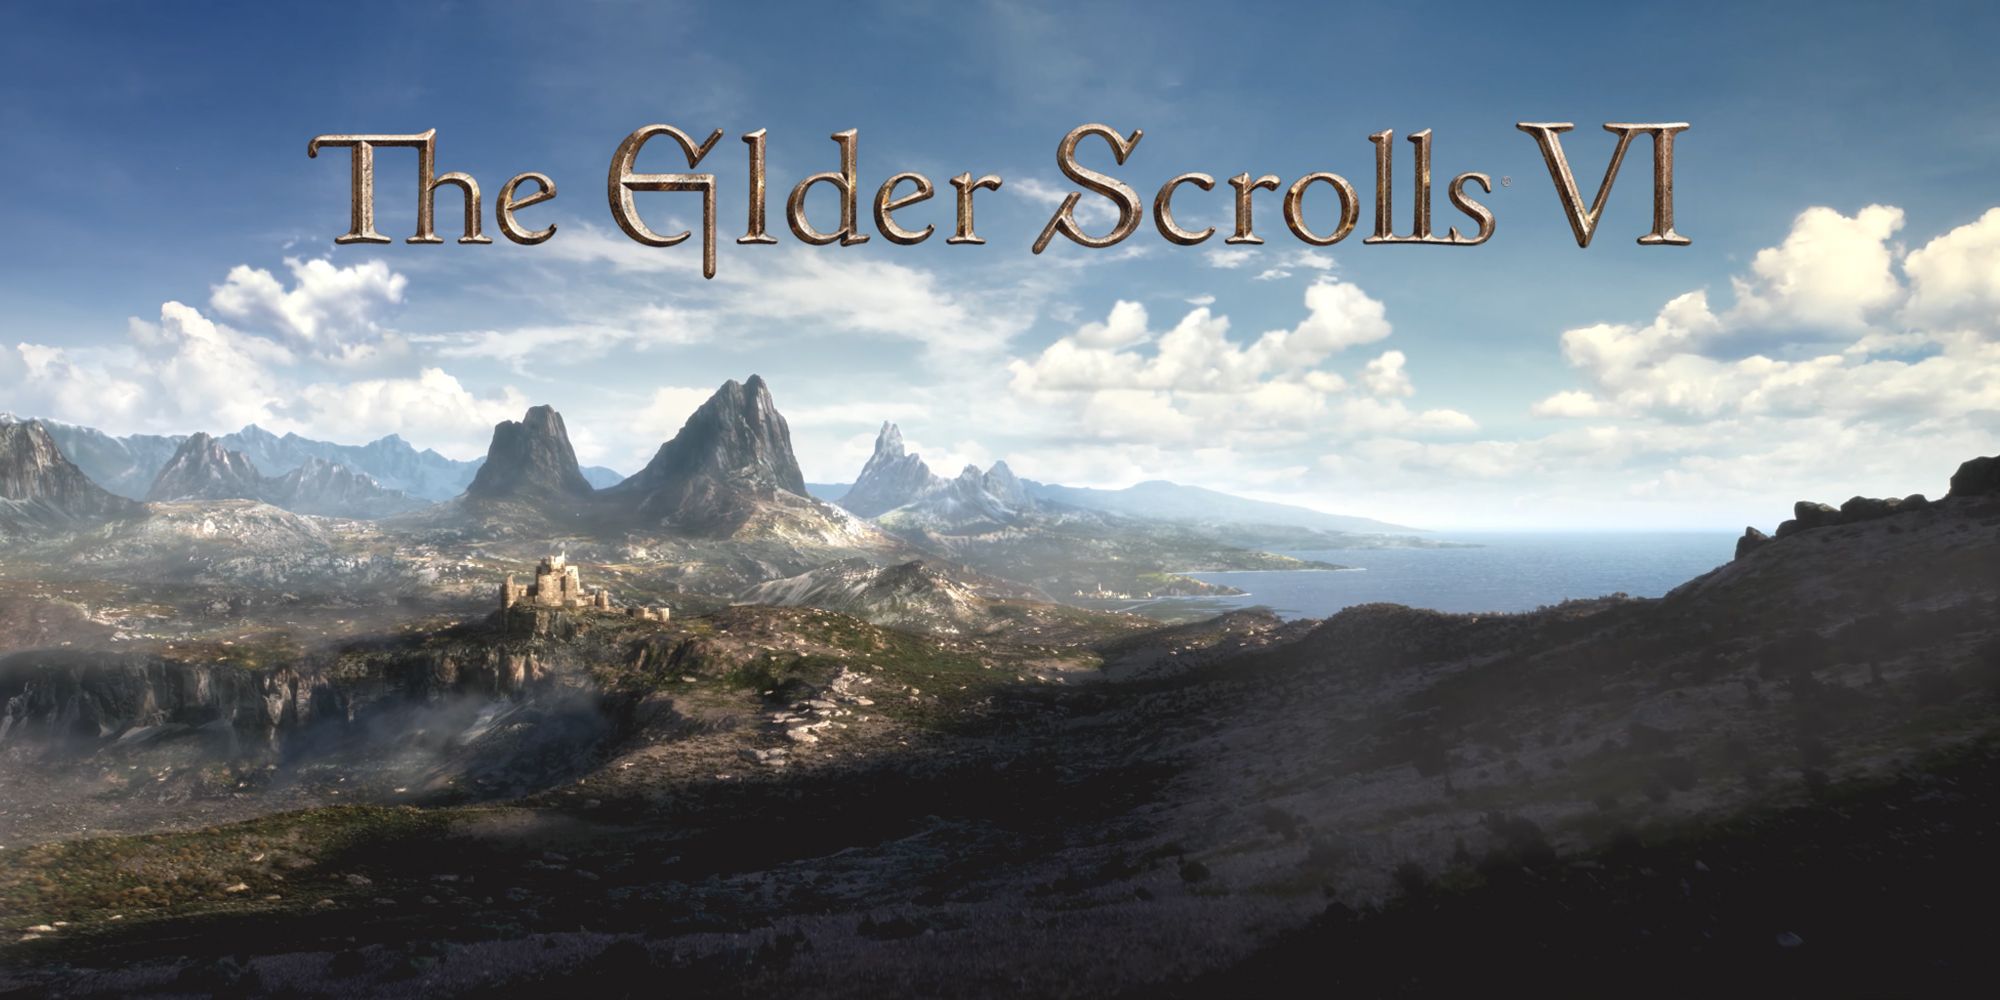 Phil Spencer Drops Clue on Release Date for The Elder Scrolls 6. Gaming  news - eSports events review, analytics, announcements, interviews,  statistics - 75srjpqI8